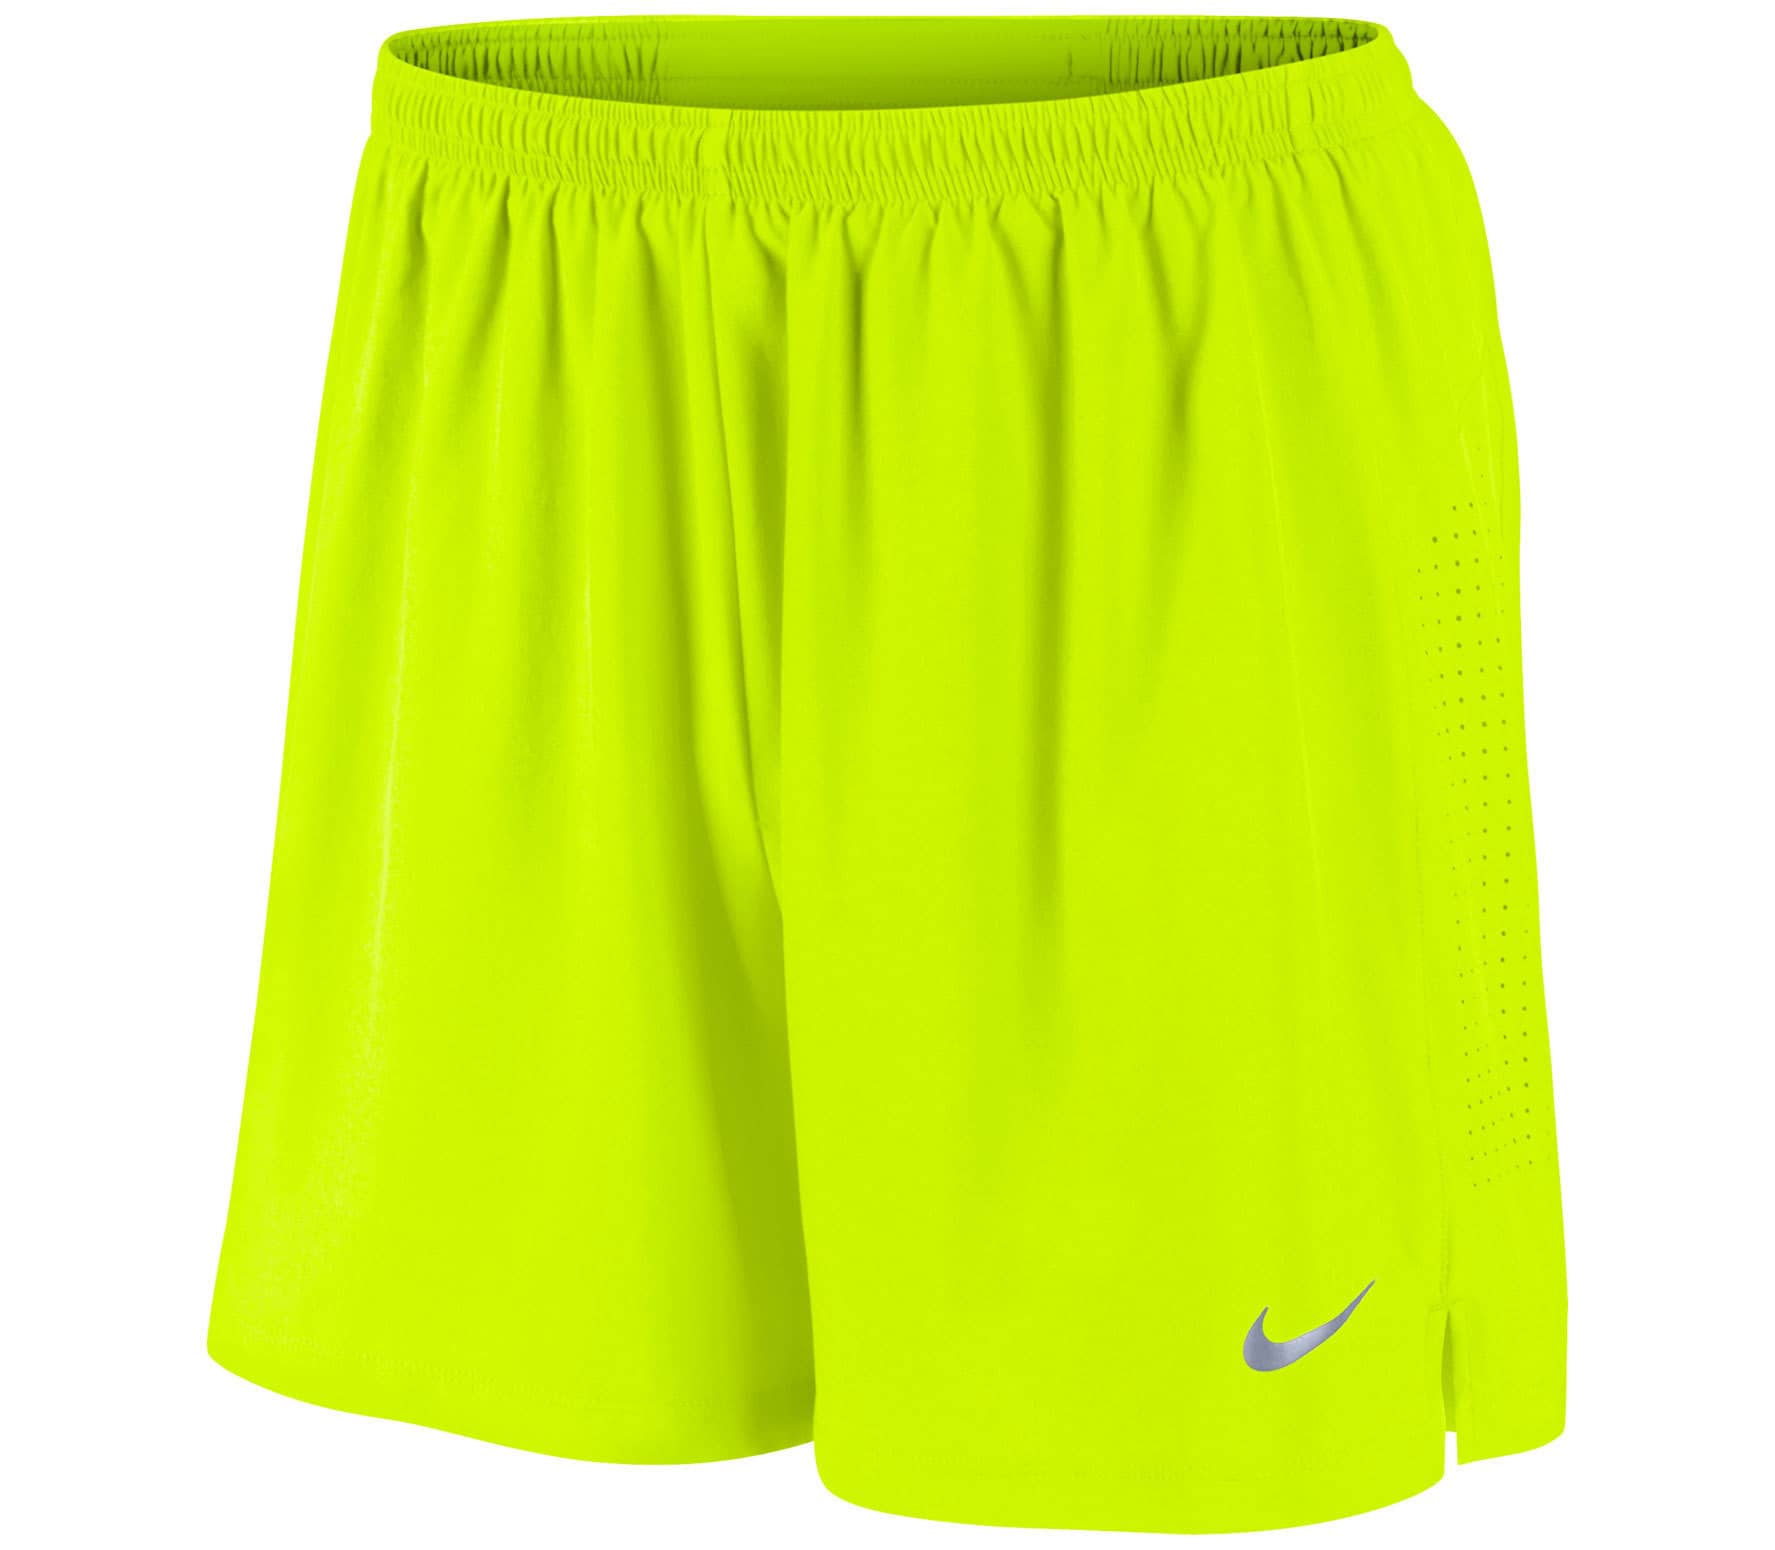 8 Incredible Neon Running Shorts For 2023